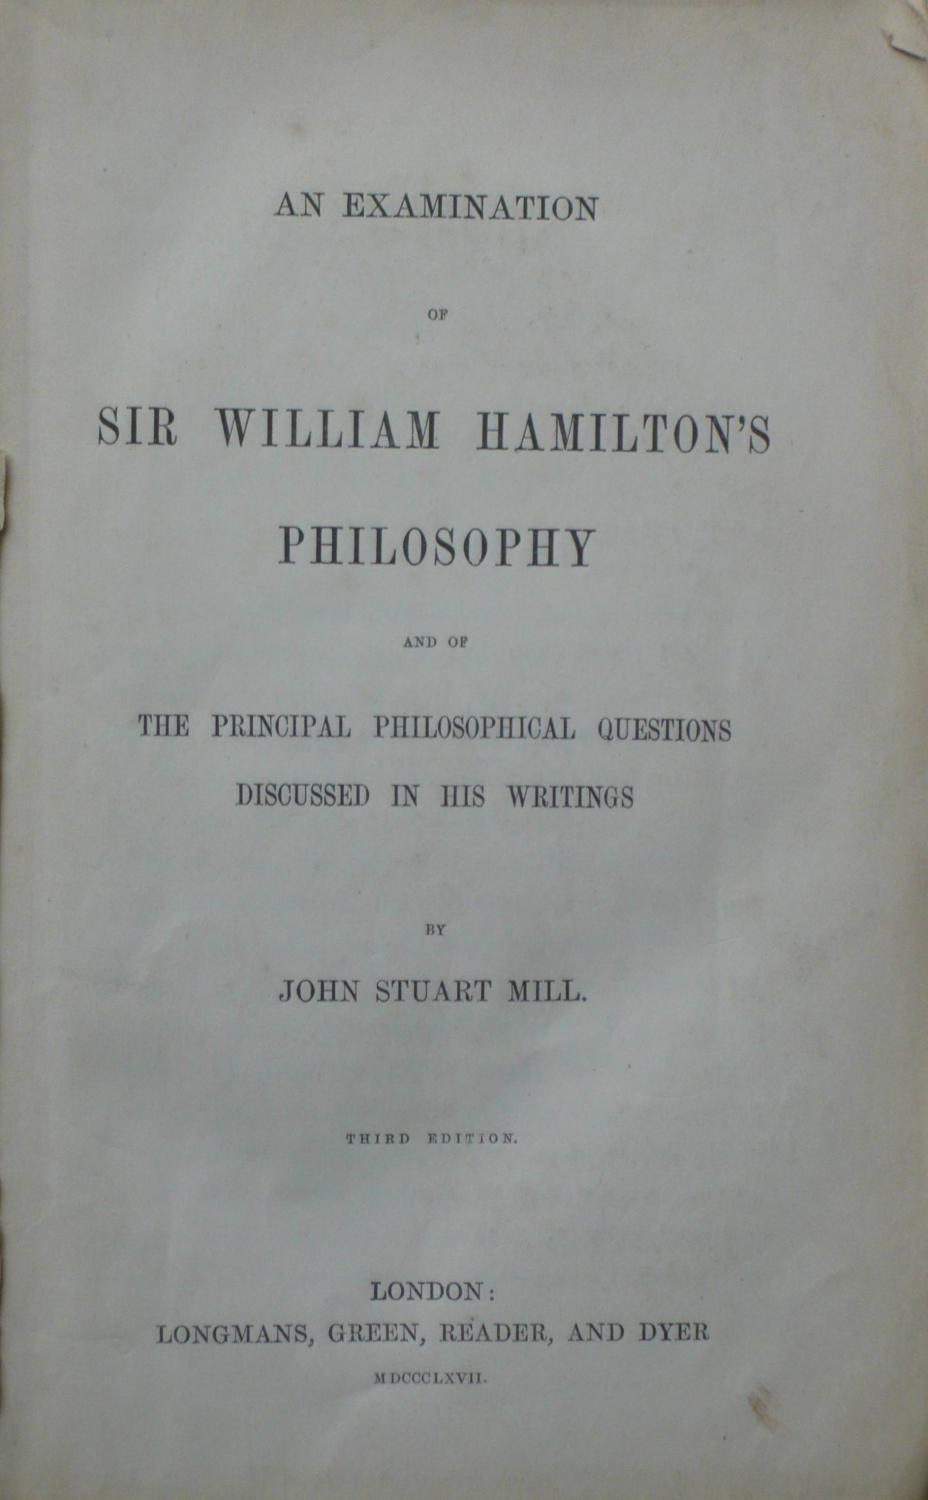 An Examination of Sir William Hamilton's Philosophy: And of the Principal Philosophical Questions Discussed in His Writings Volume 1 (English Edition)